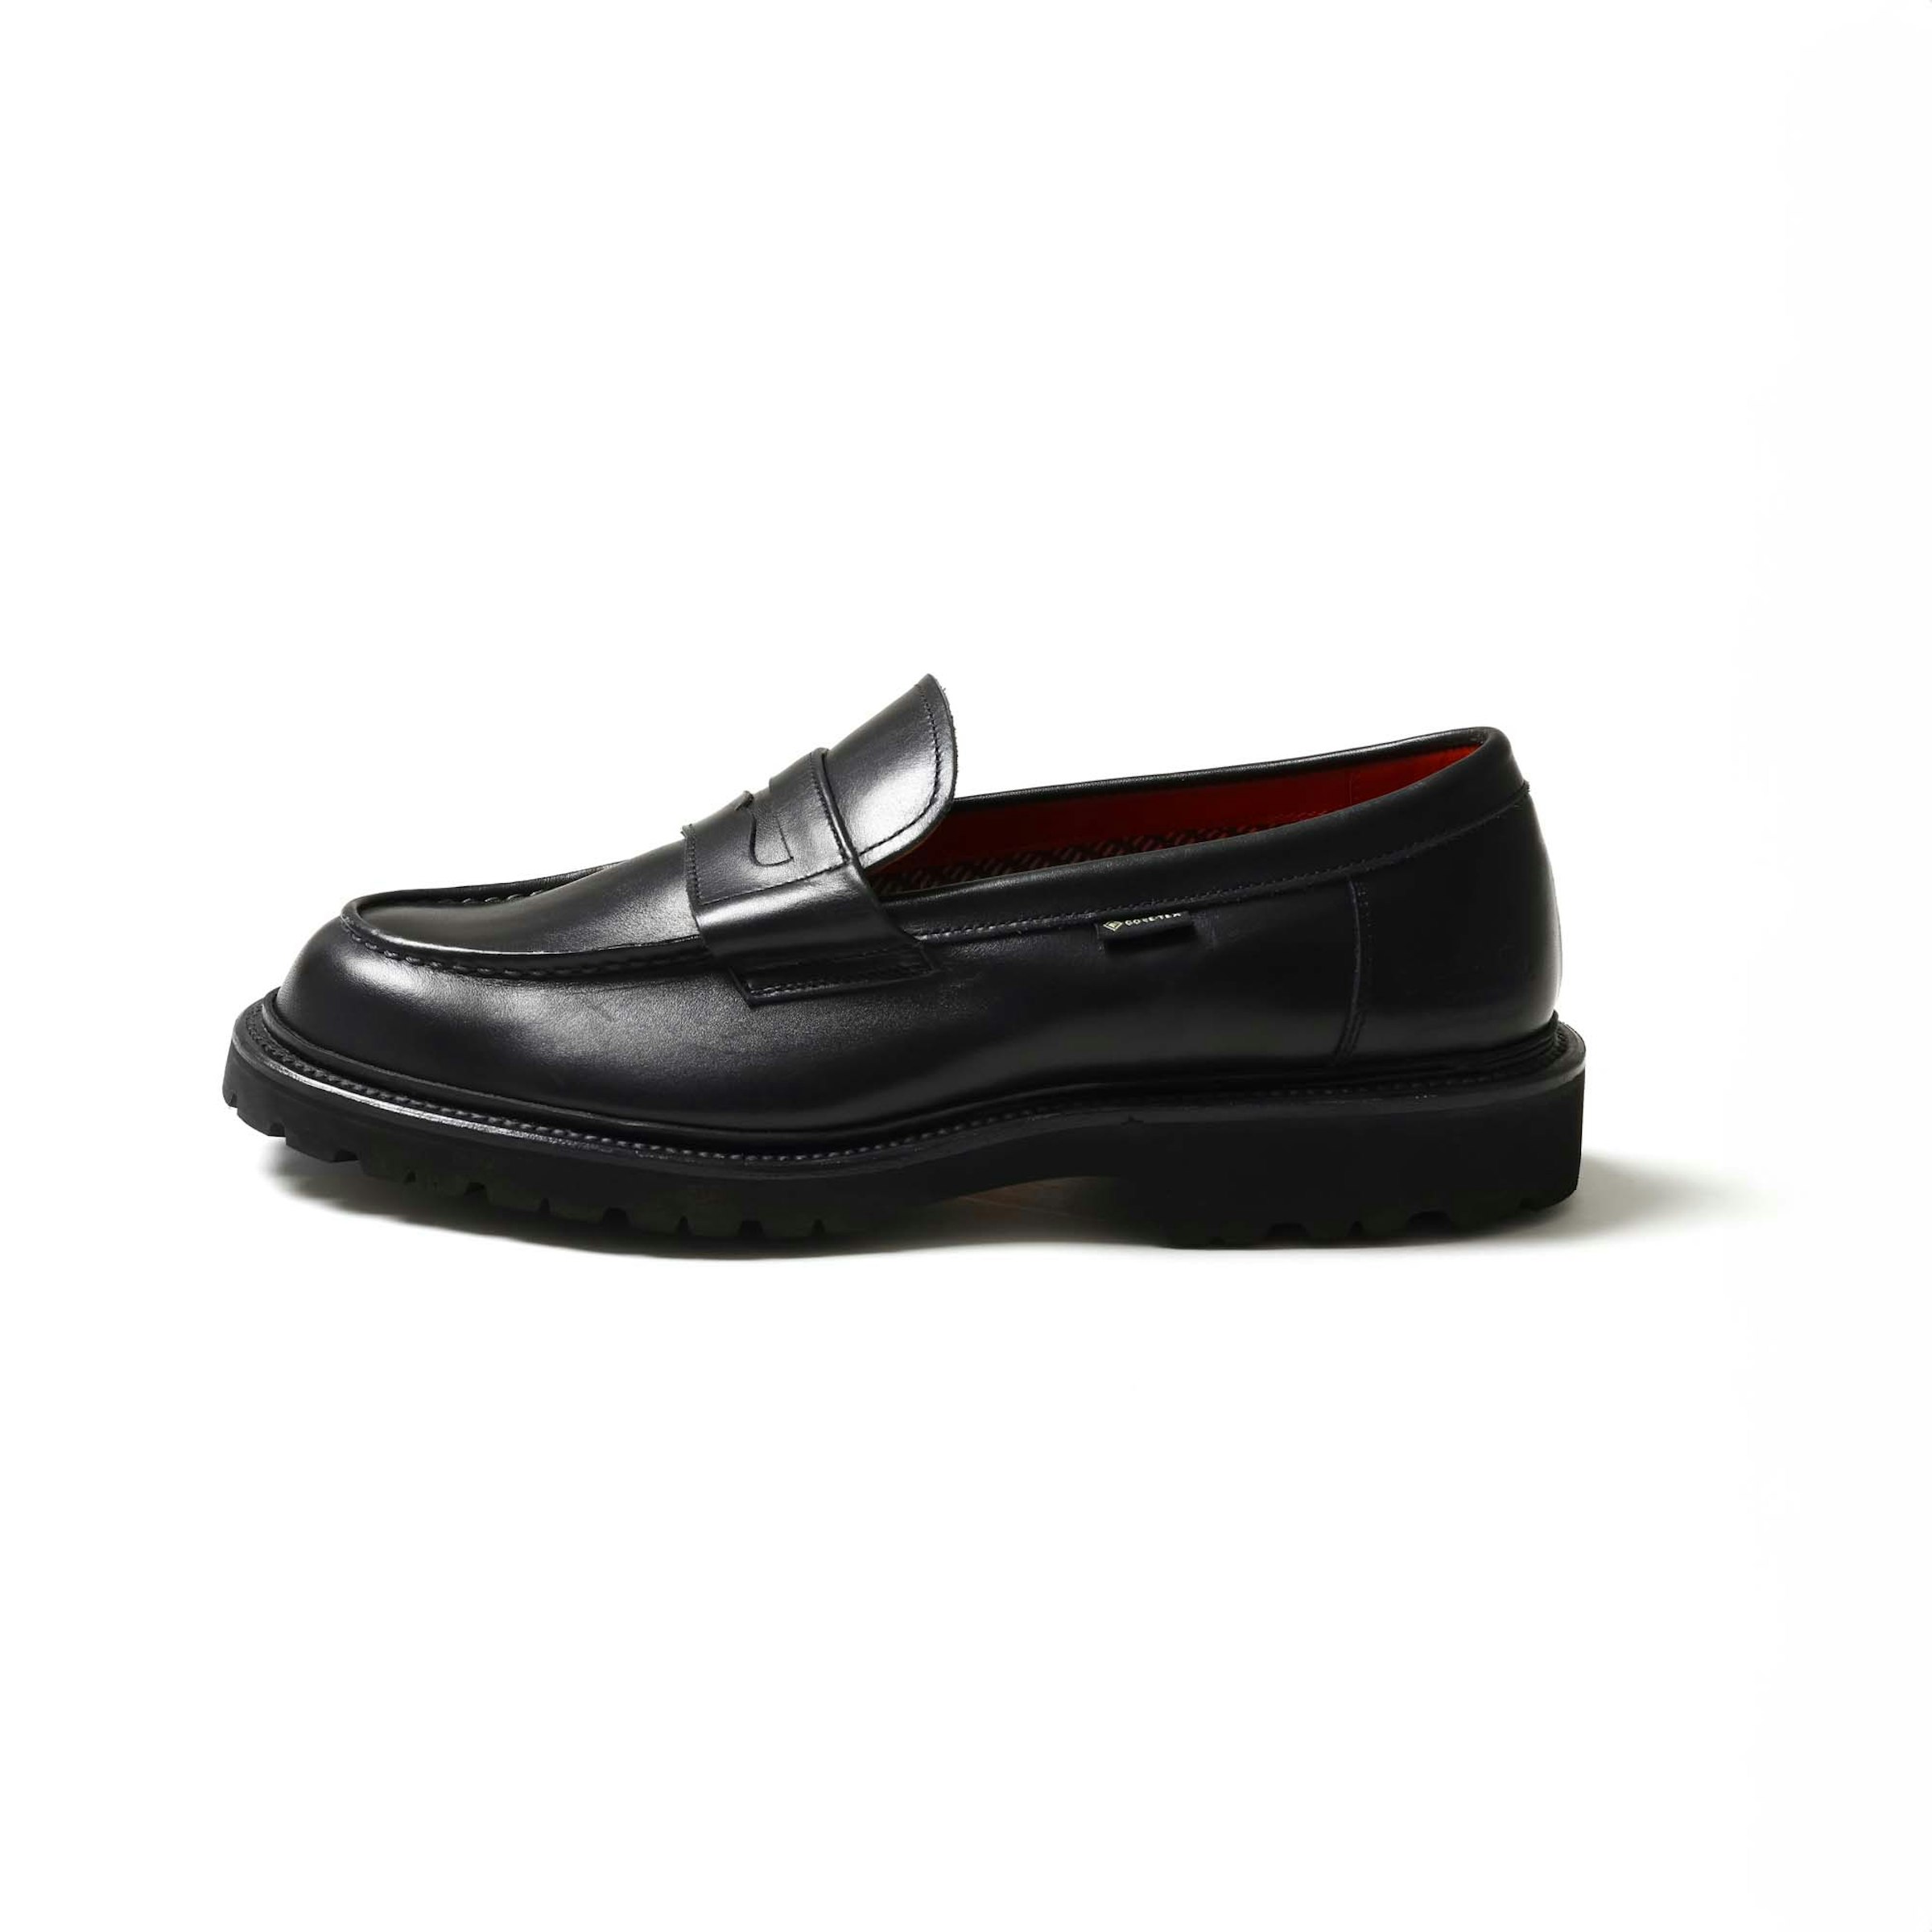 Loafers GTX - 50,600 yen (including tax)